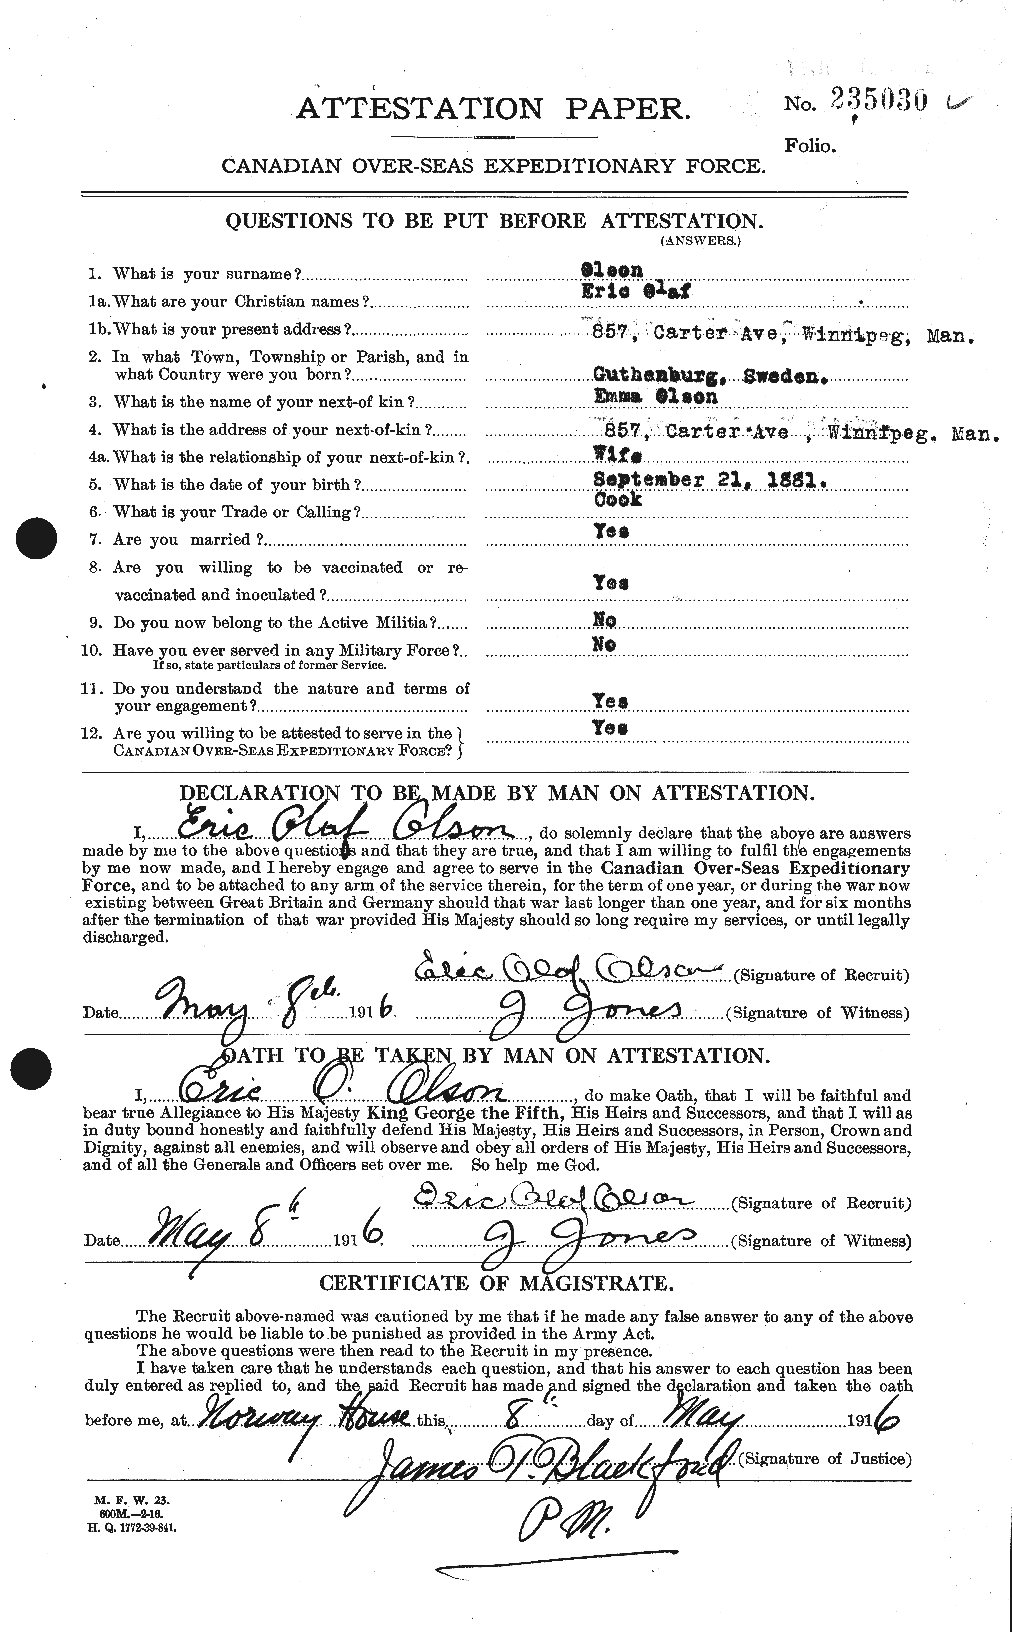 Personnel Records of the First World War - CEF 557199a